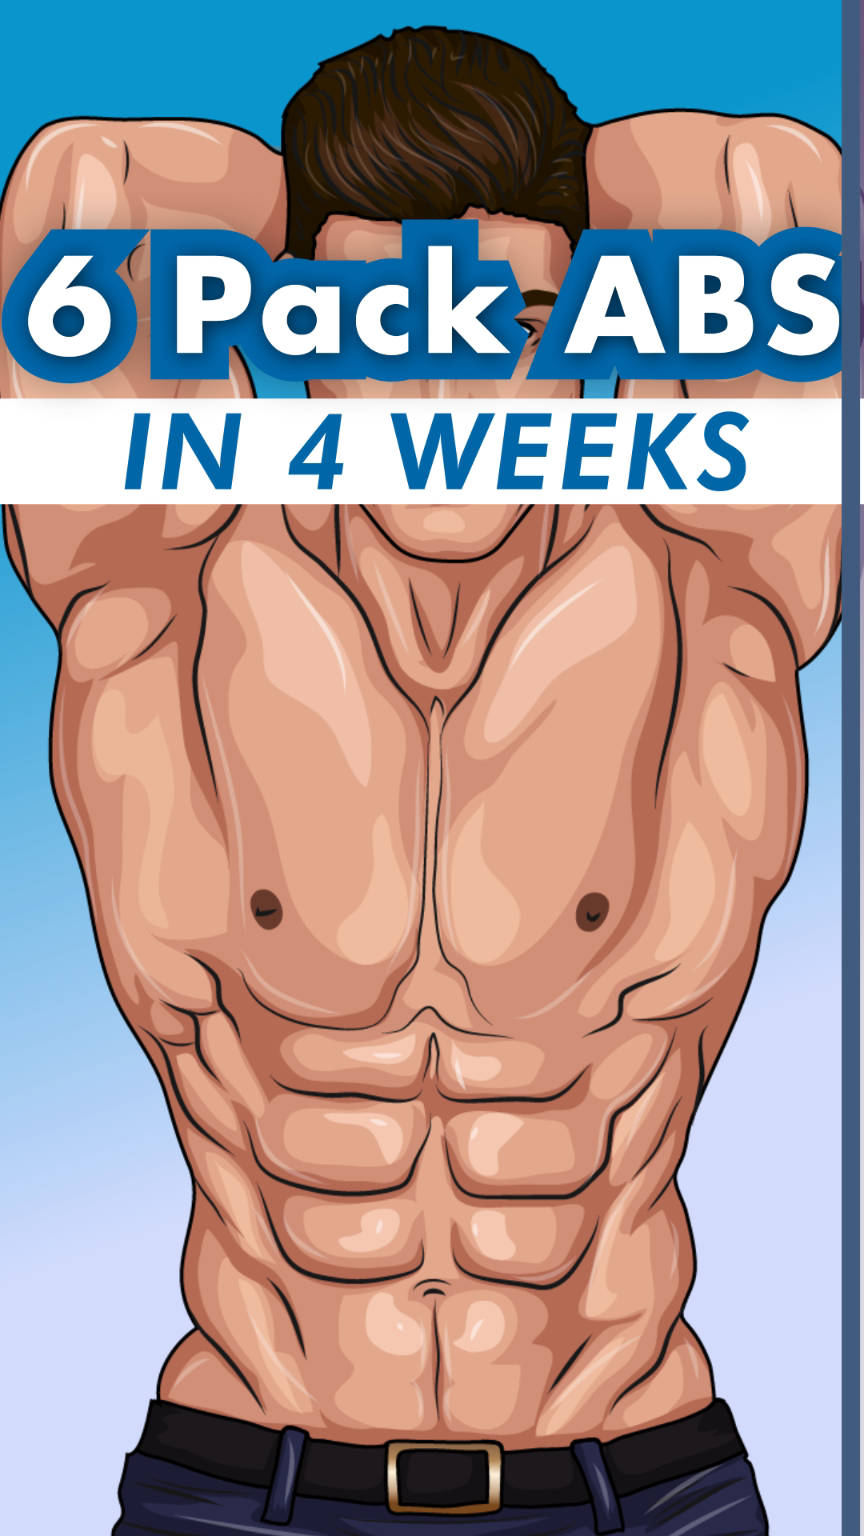 Get Ultimate 28 Days Meal & Workout Plan! Click to download the app on App Store now! -   21 mens fitness meals
 ideas